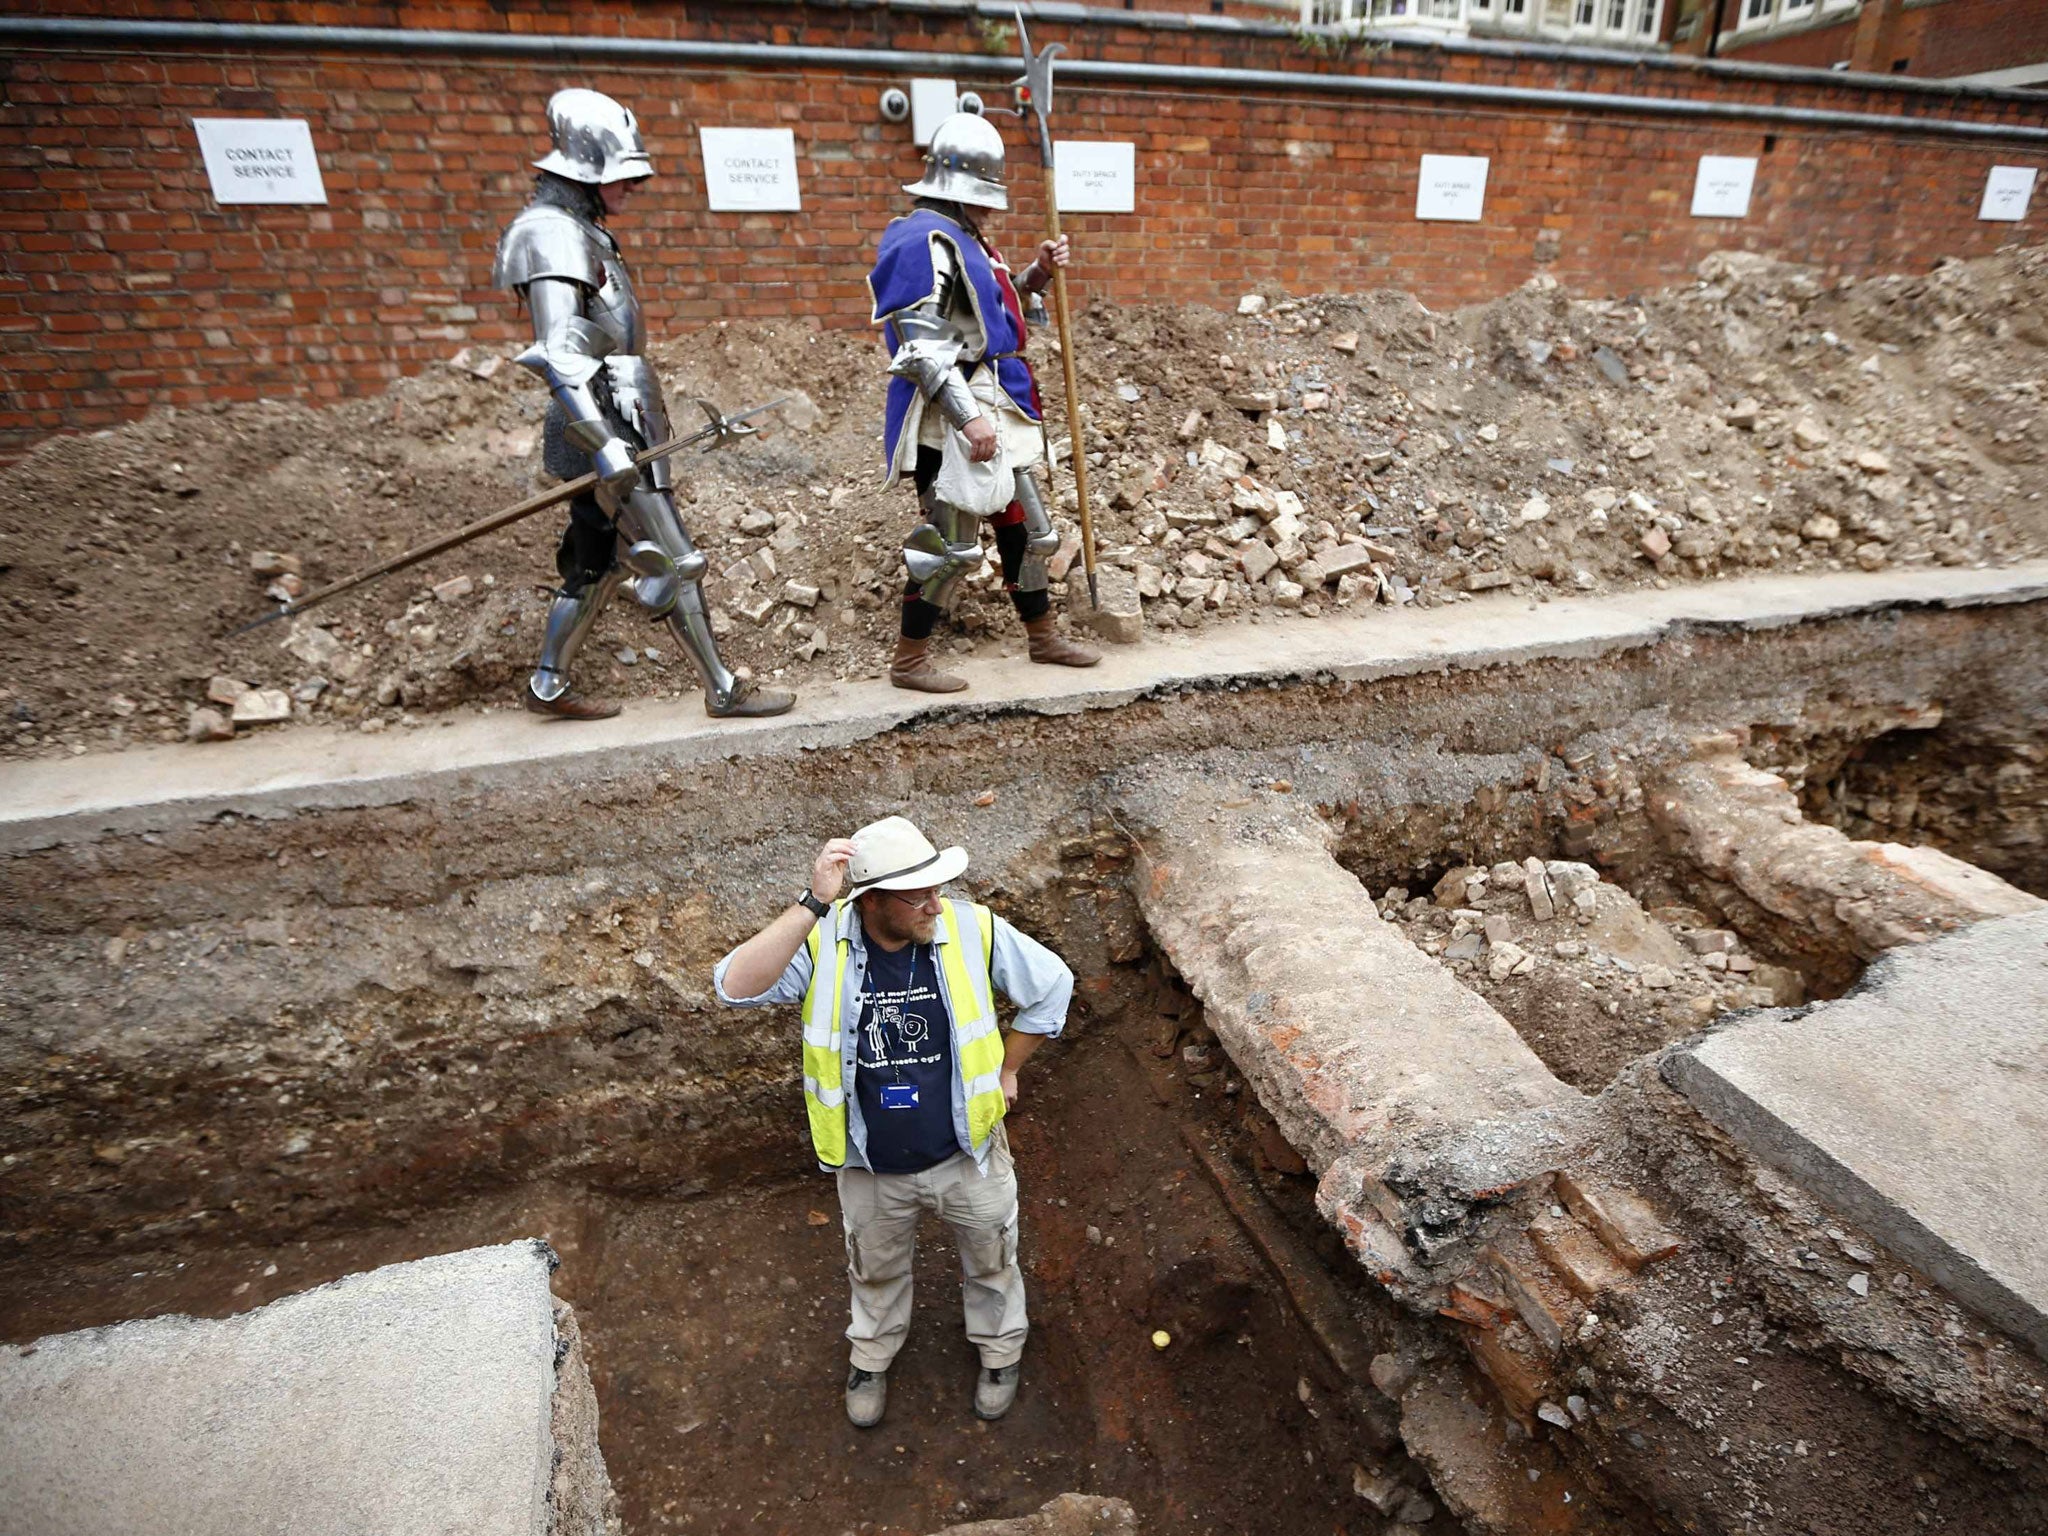 The Leicester car park where Richard III's remains were found